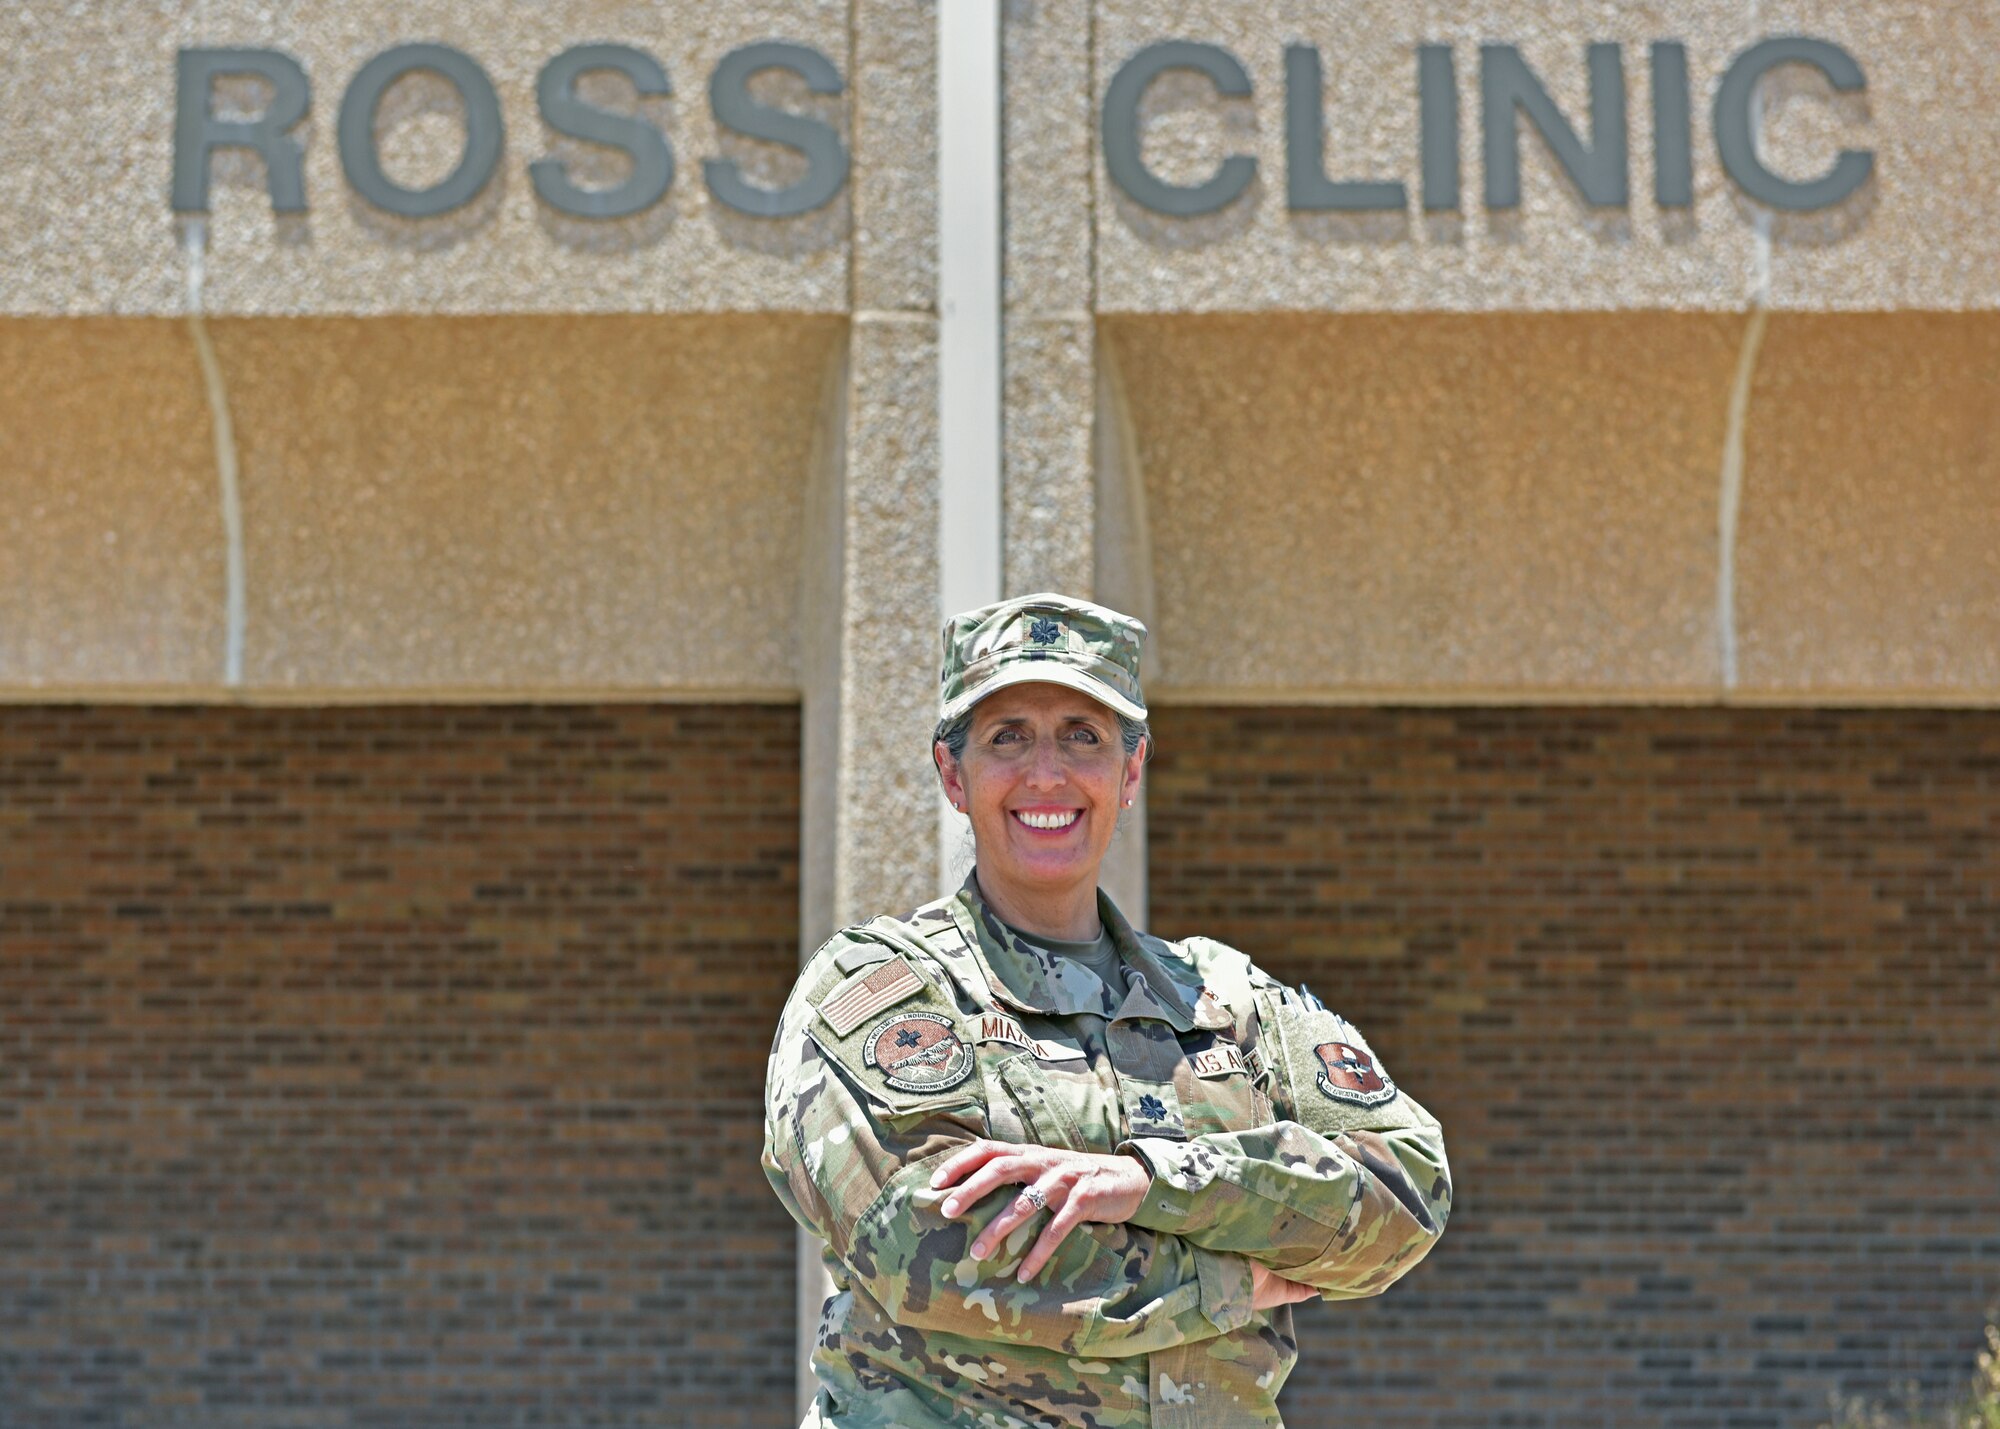 U.S. Air Force Lt. Col. Brenda Miazga, 17th Operational Medical Readiness Squadron commander, poses for a photo in front of the Ross Clinic at Goodfellow Air Force Base, Texas, July 12, 2022. Miazga is in charge of ambulatory health services for nearly 26,000 patients in the community and ensures the nurses and medical technicians are prepared for anything that comes their way. (U.S. Air Force photo by Senior Airman Ashley Thrash)